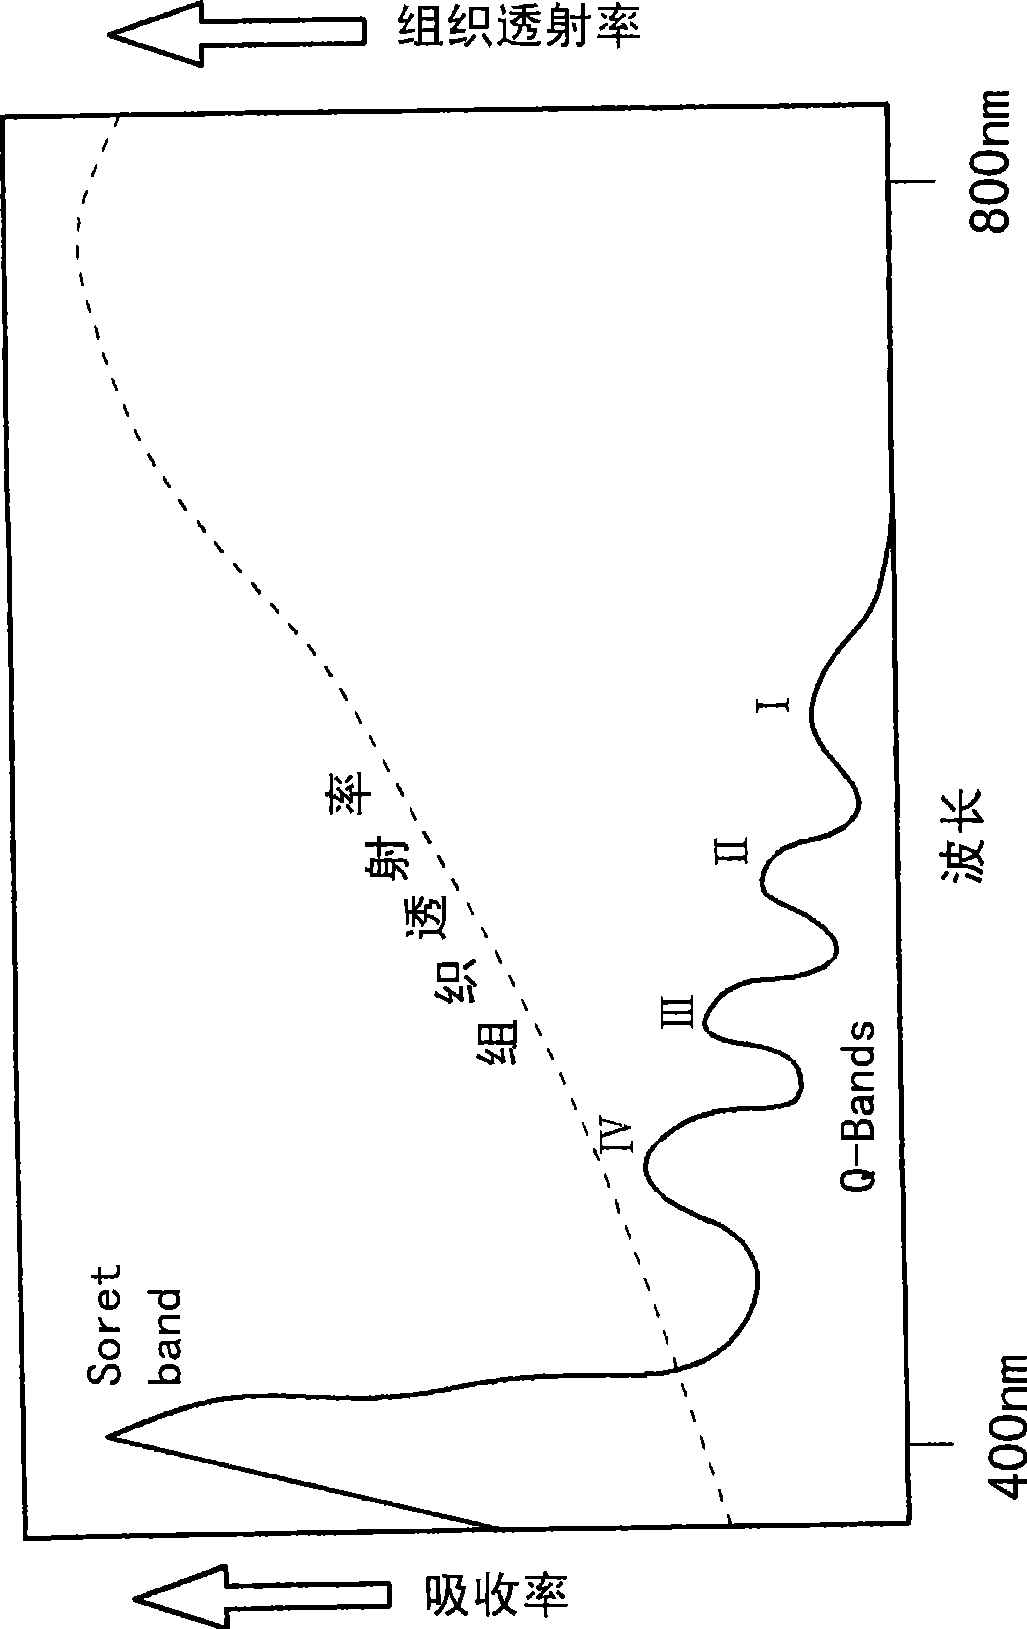 Radiation device for photodynamic therapy